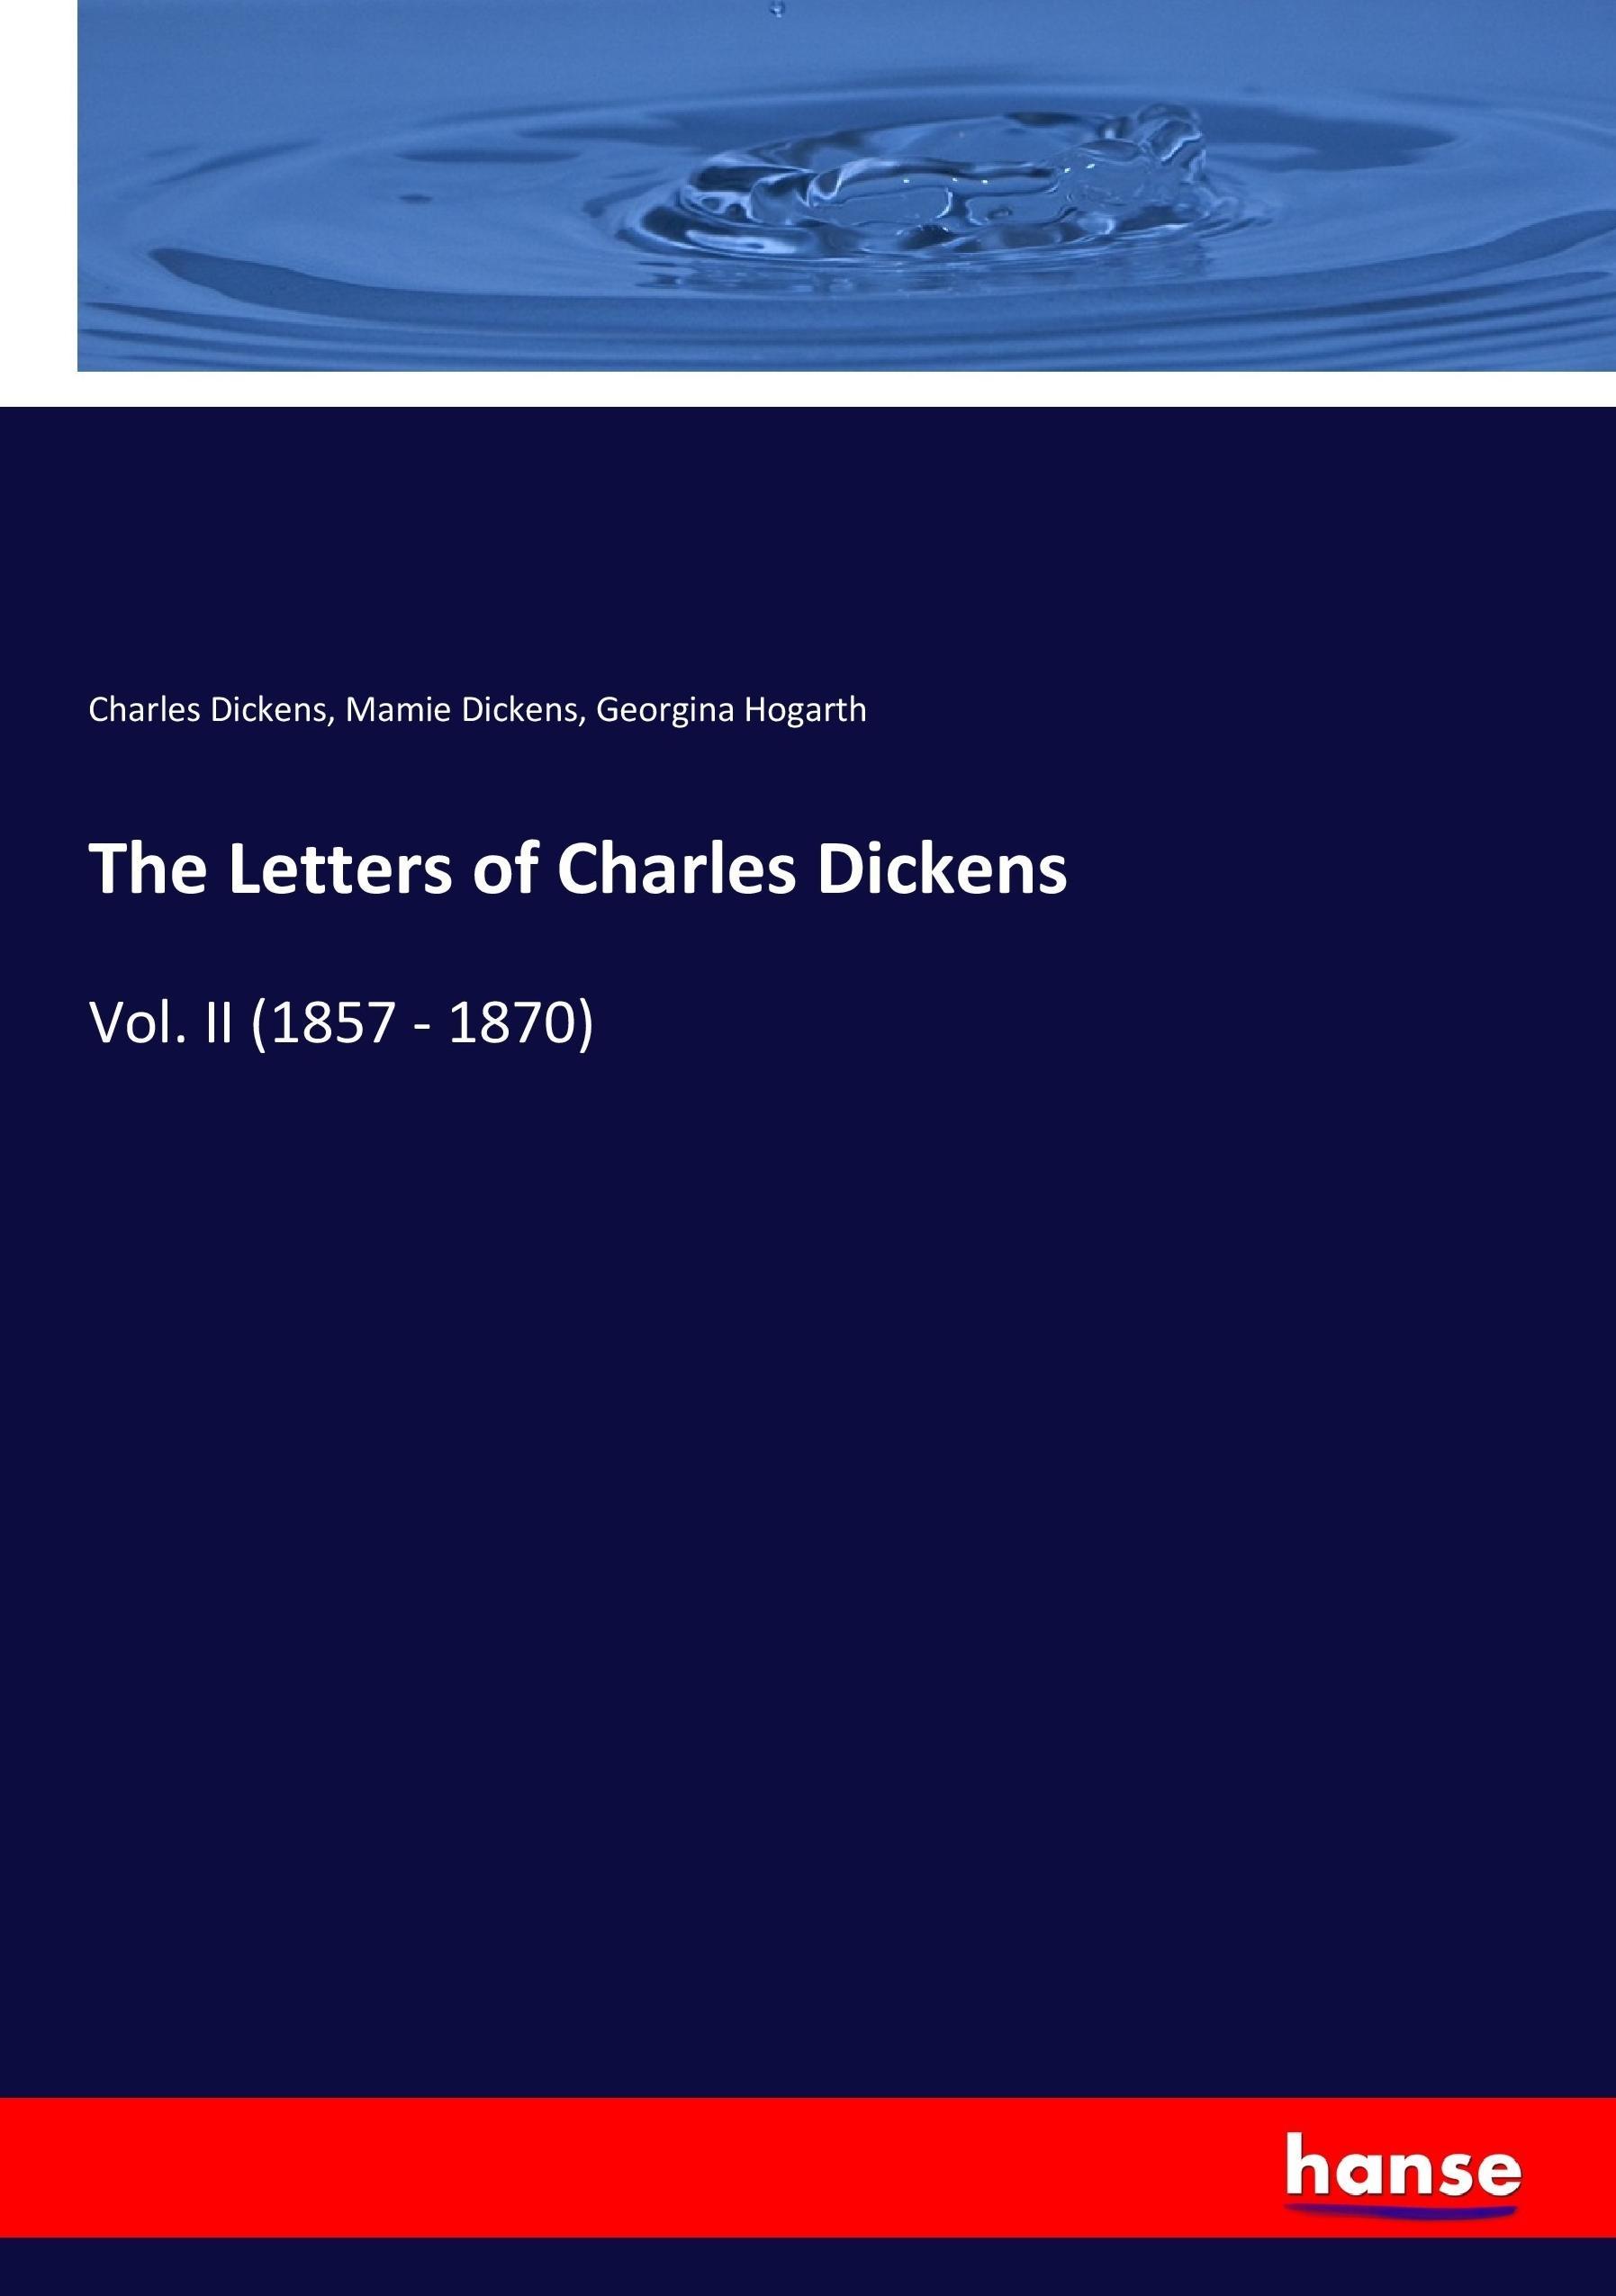 The Letters of Charles Dickens | Vol. II (1857 - 1870) | Charles Dickens (u. a.) | Taschenbuch | Paperback | 472 S. | Englisch | 2017 | hansebooks | EAN 9783744688703 - Dickens, Charles